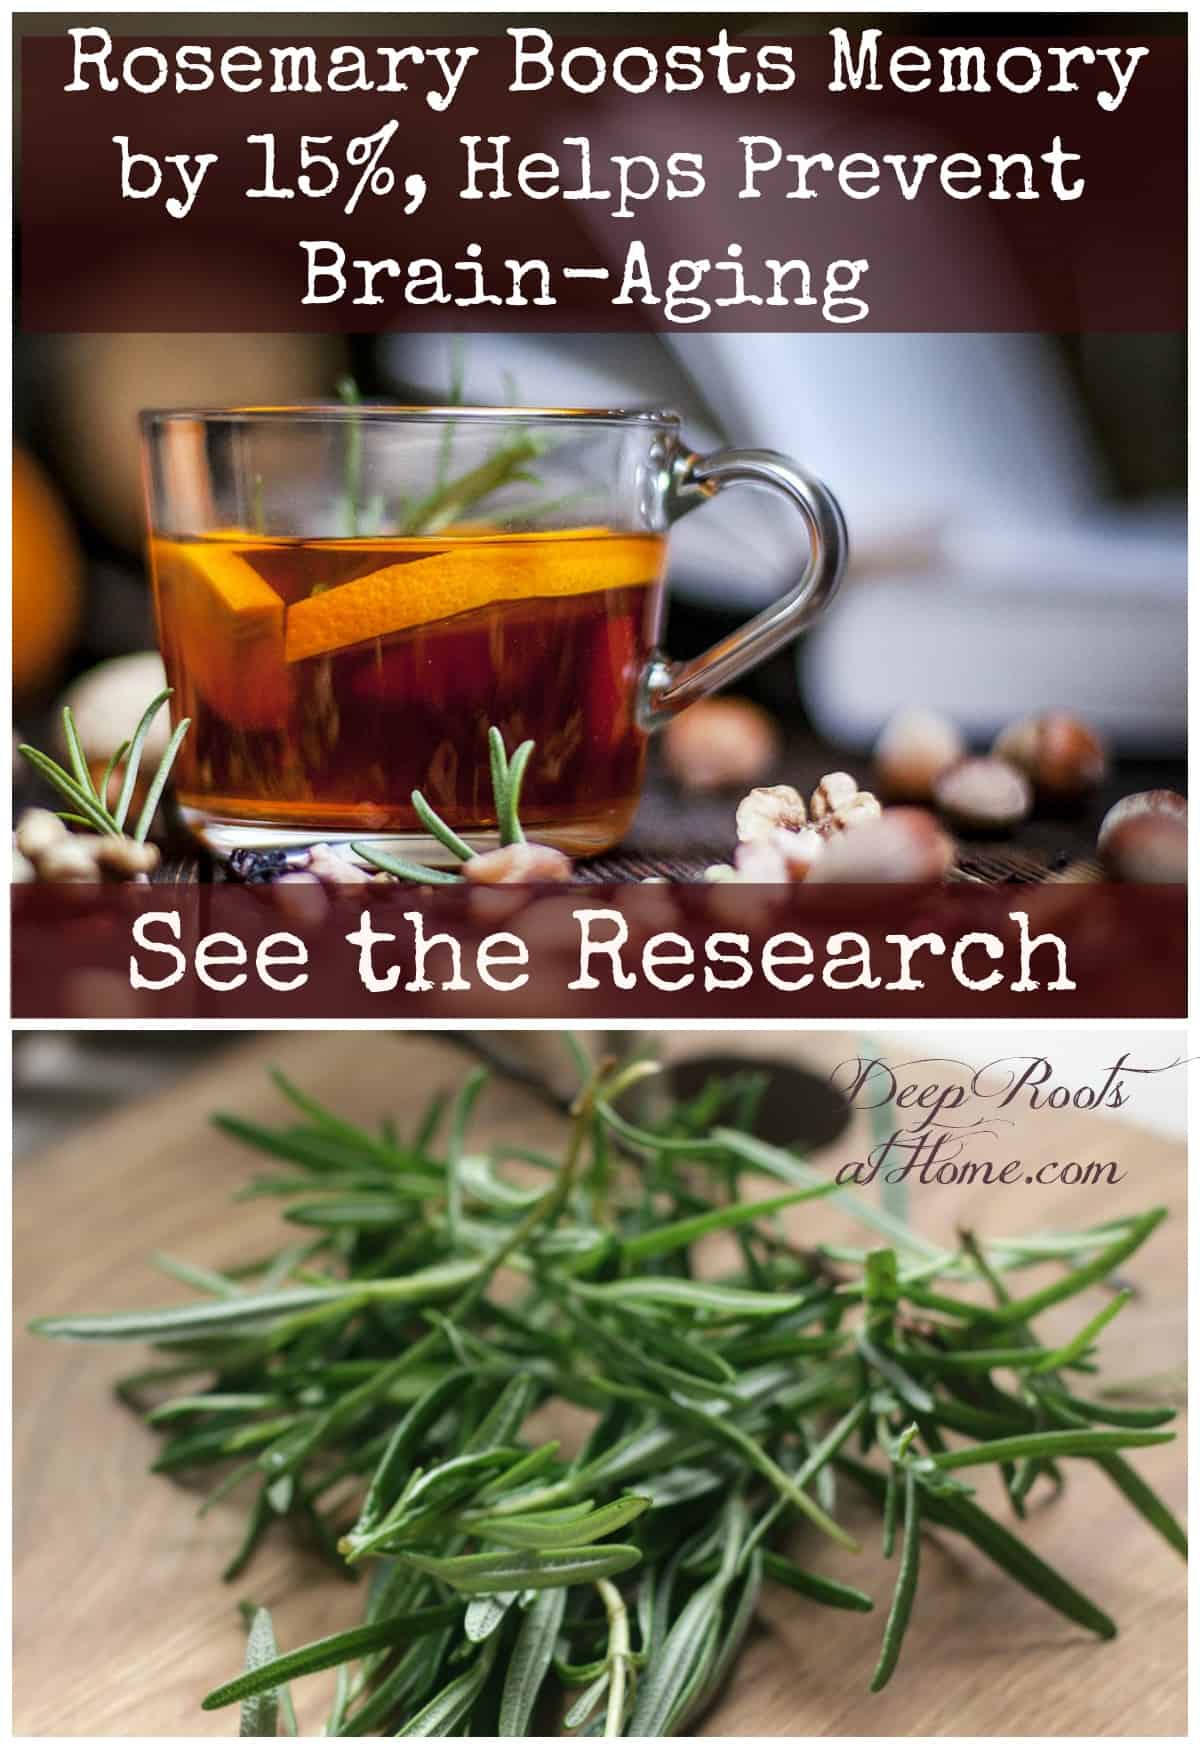 Rosemary Boosts Memory by 15%, Prevents Brain-Aging Says the Science. Rosemary tea and rosemary herb in bloom and cut